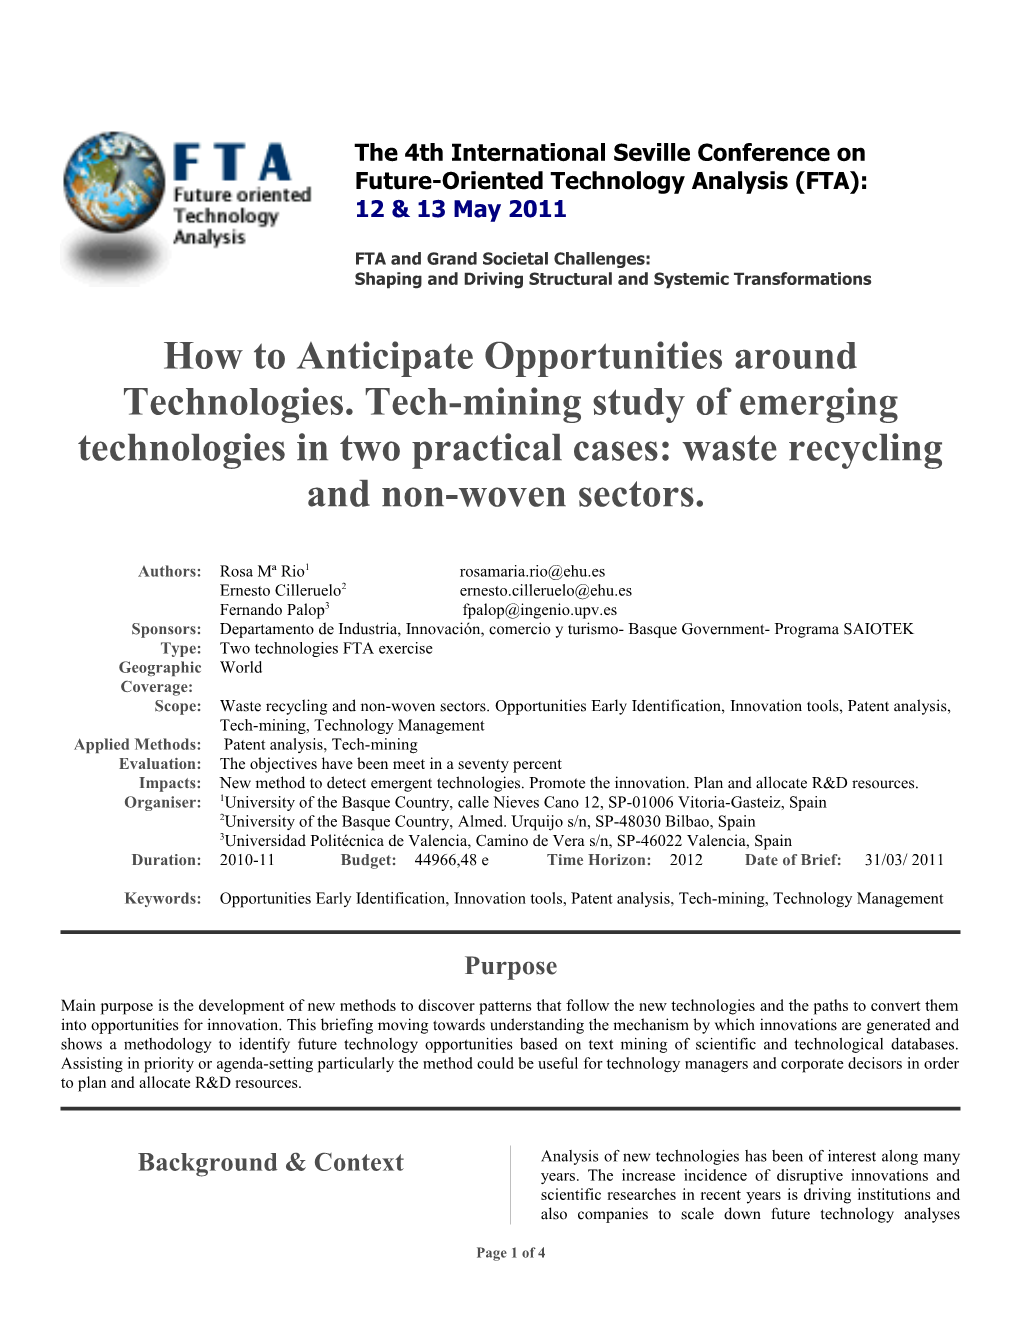 How to Anticipate Opportunities Around Technologies. Tech-Mining Study of Emerging Technologies